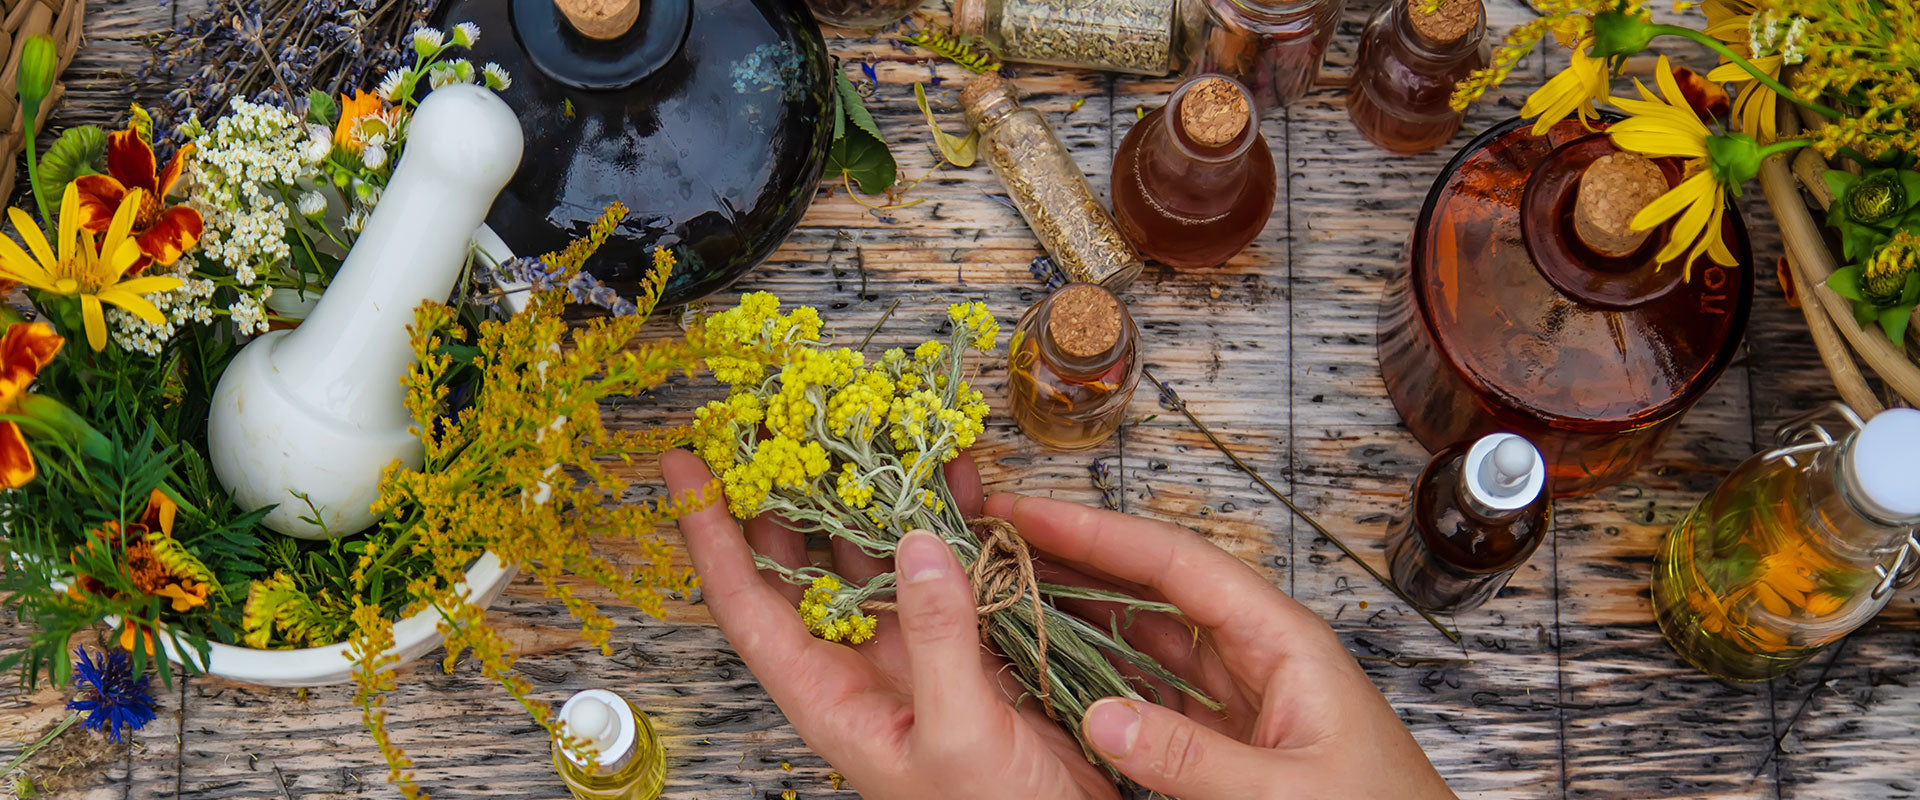 Alcohol for Herbalists by Culinary Solvent